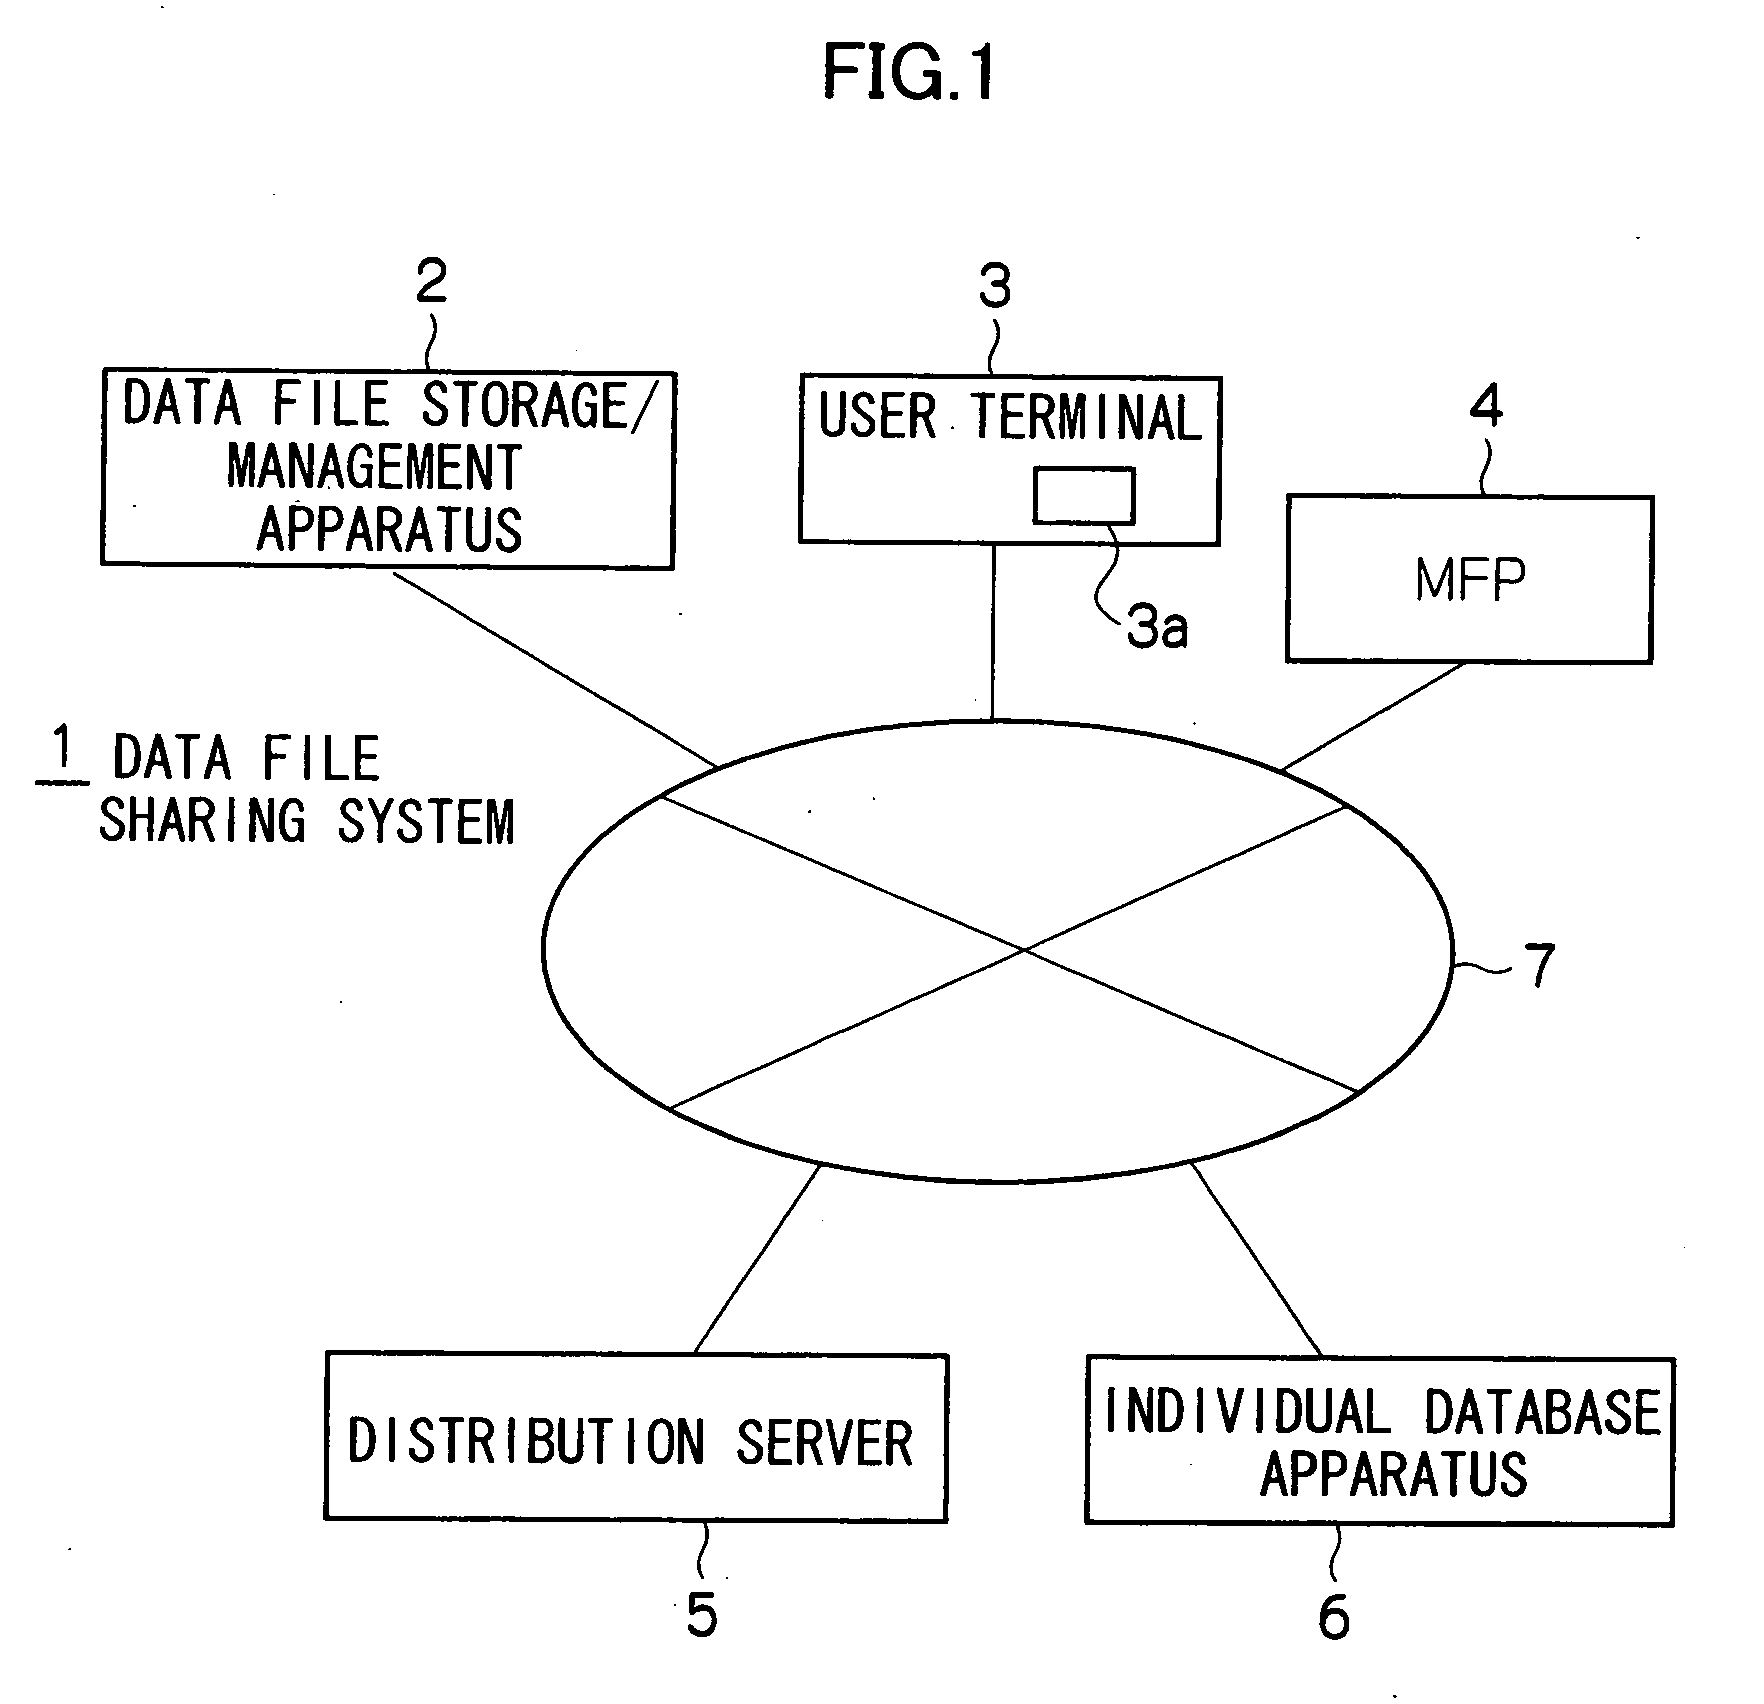 Data file storage/management apparatus and electronic mail processing program thereof